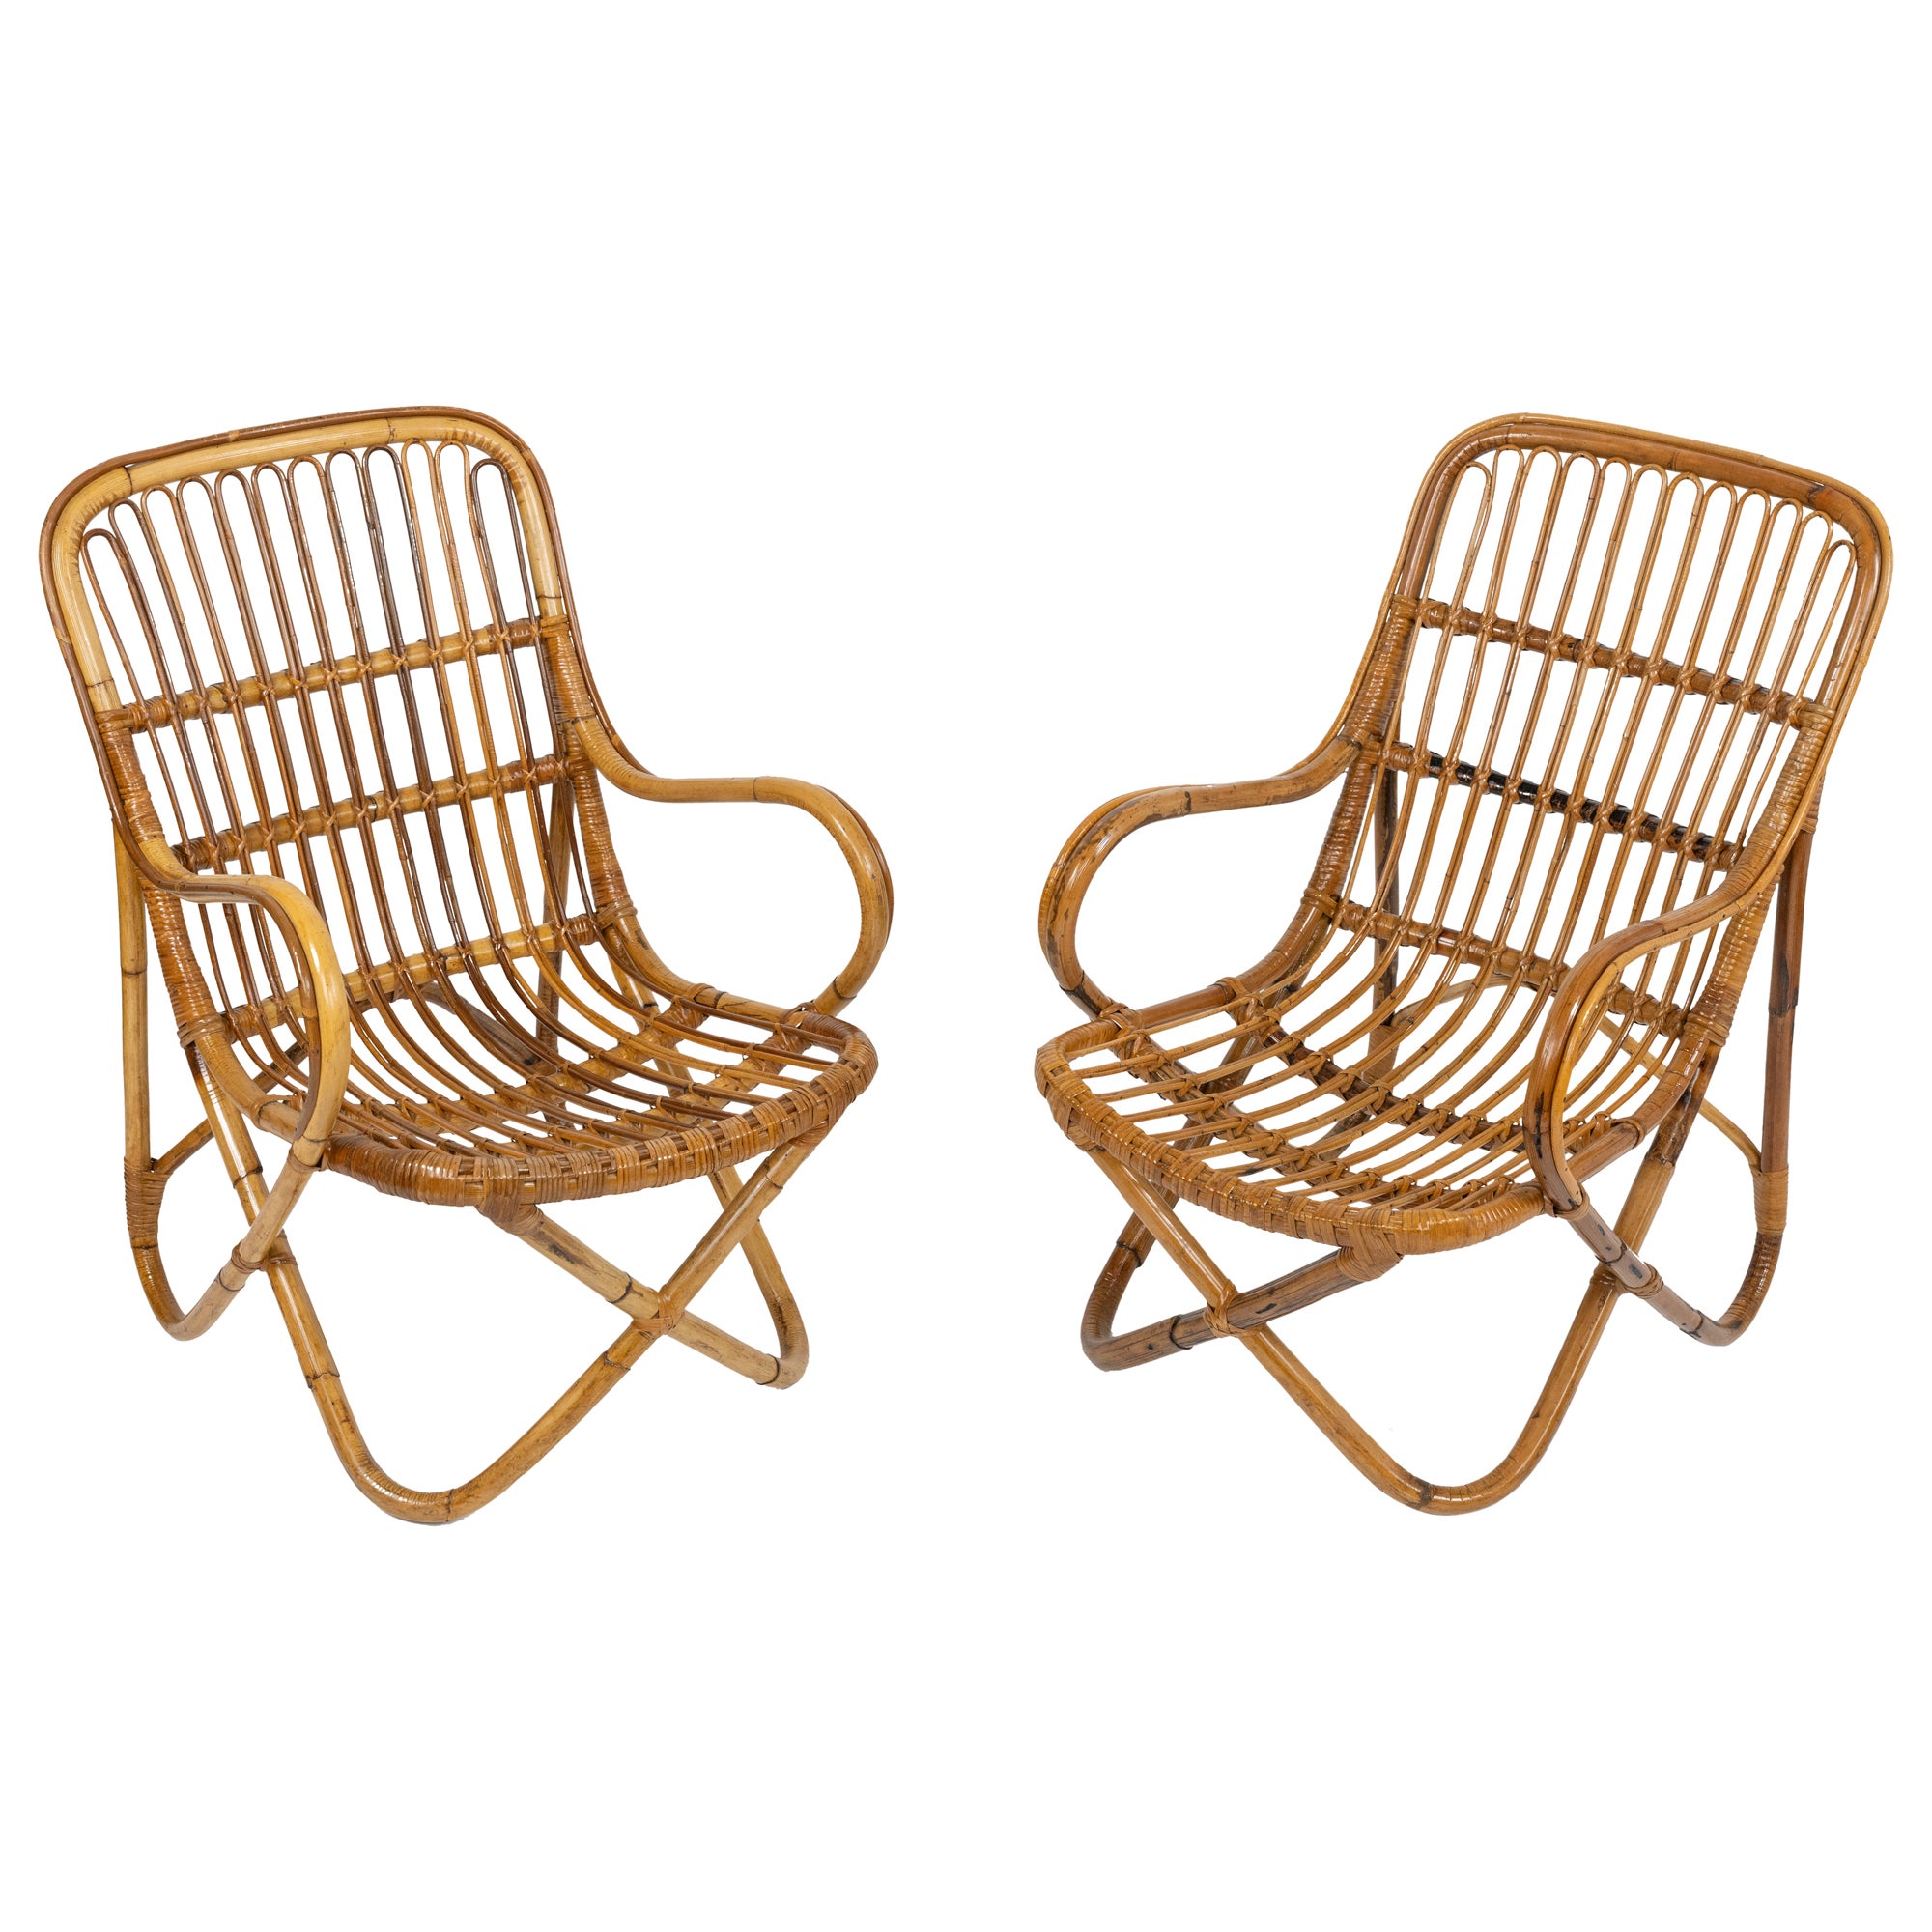 Midcentury Bamboo and Rattan Pair of Armchairs Tito Agnoli Style, Italy 1960s For Sale